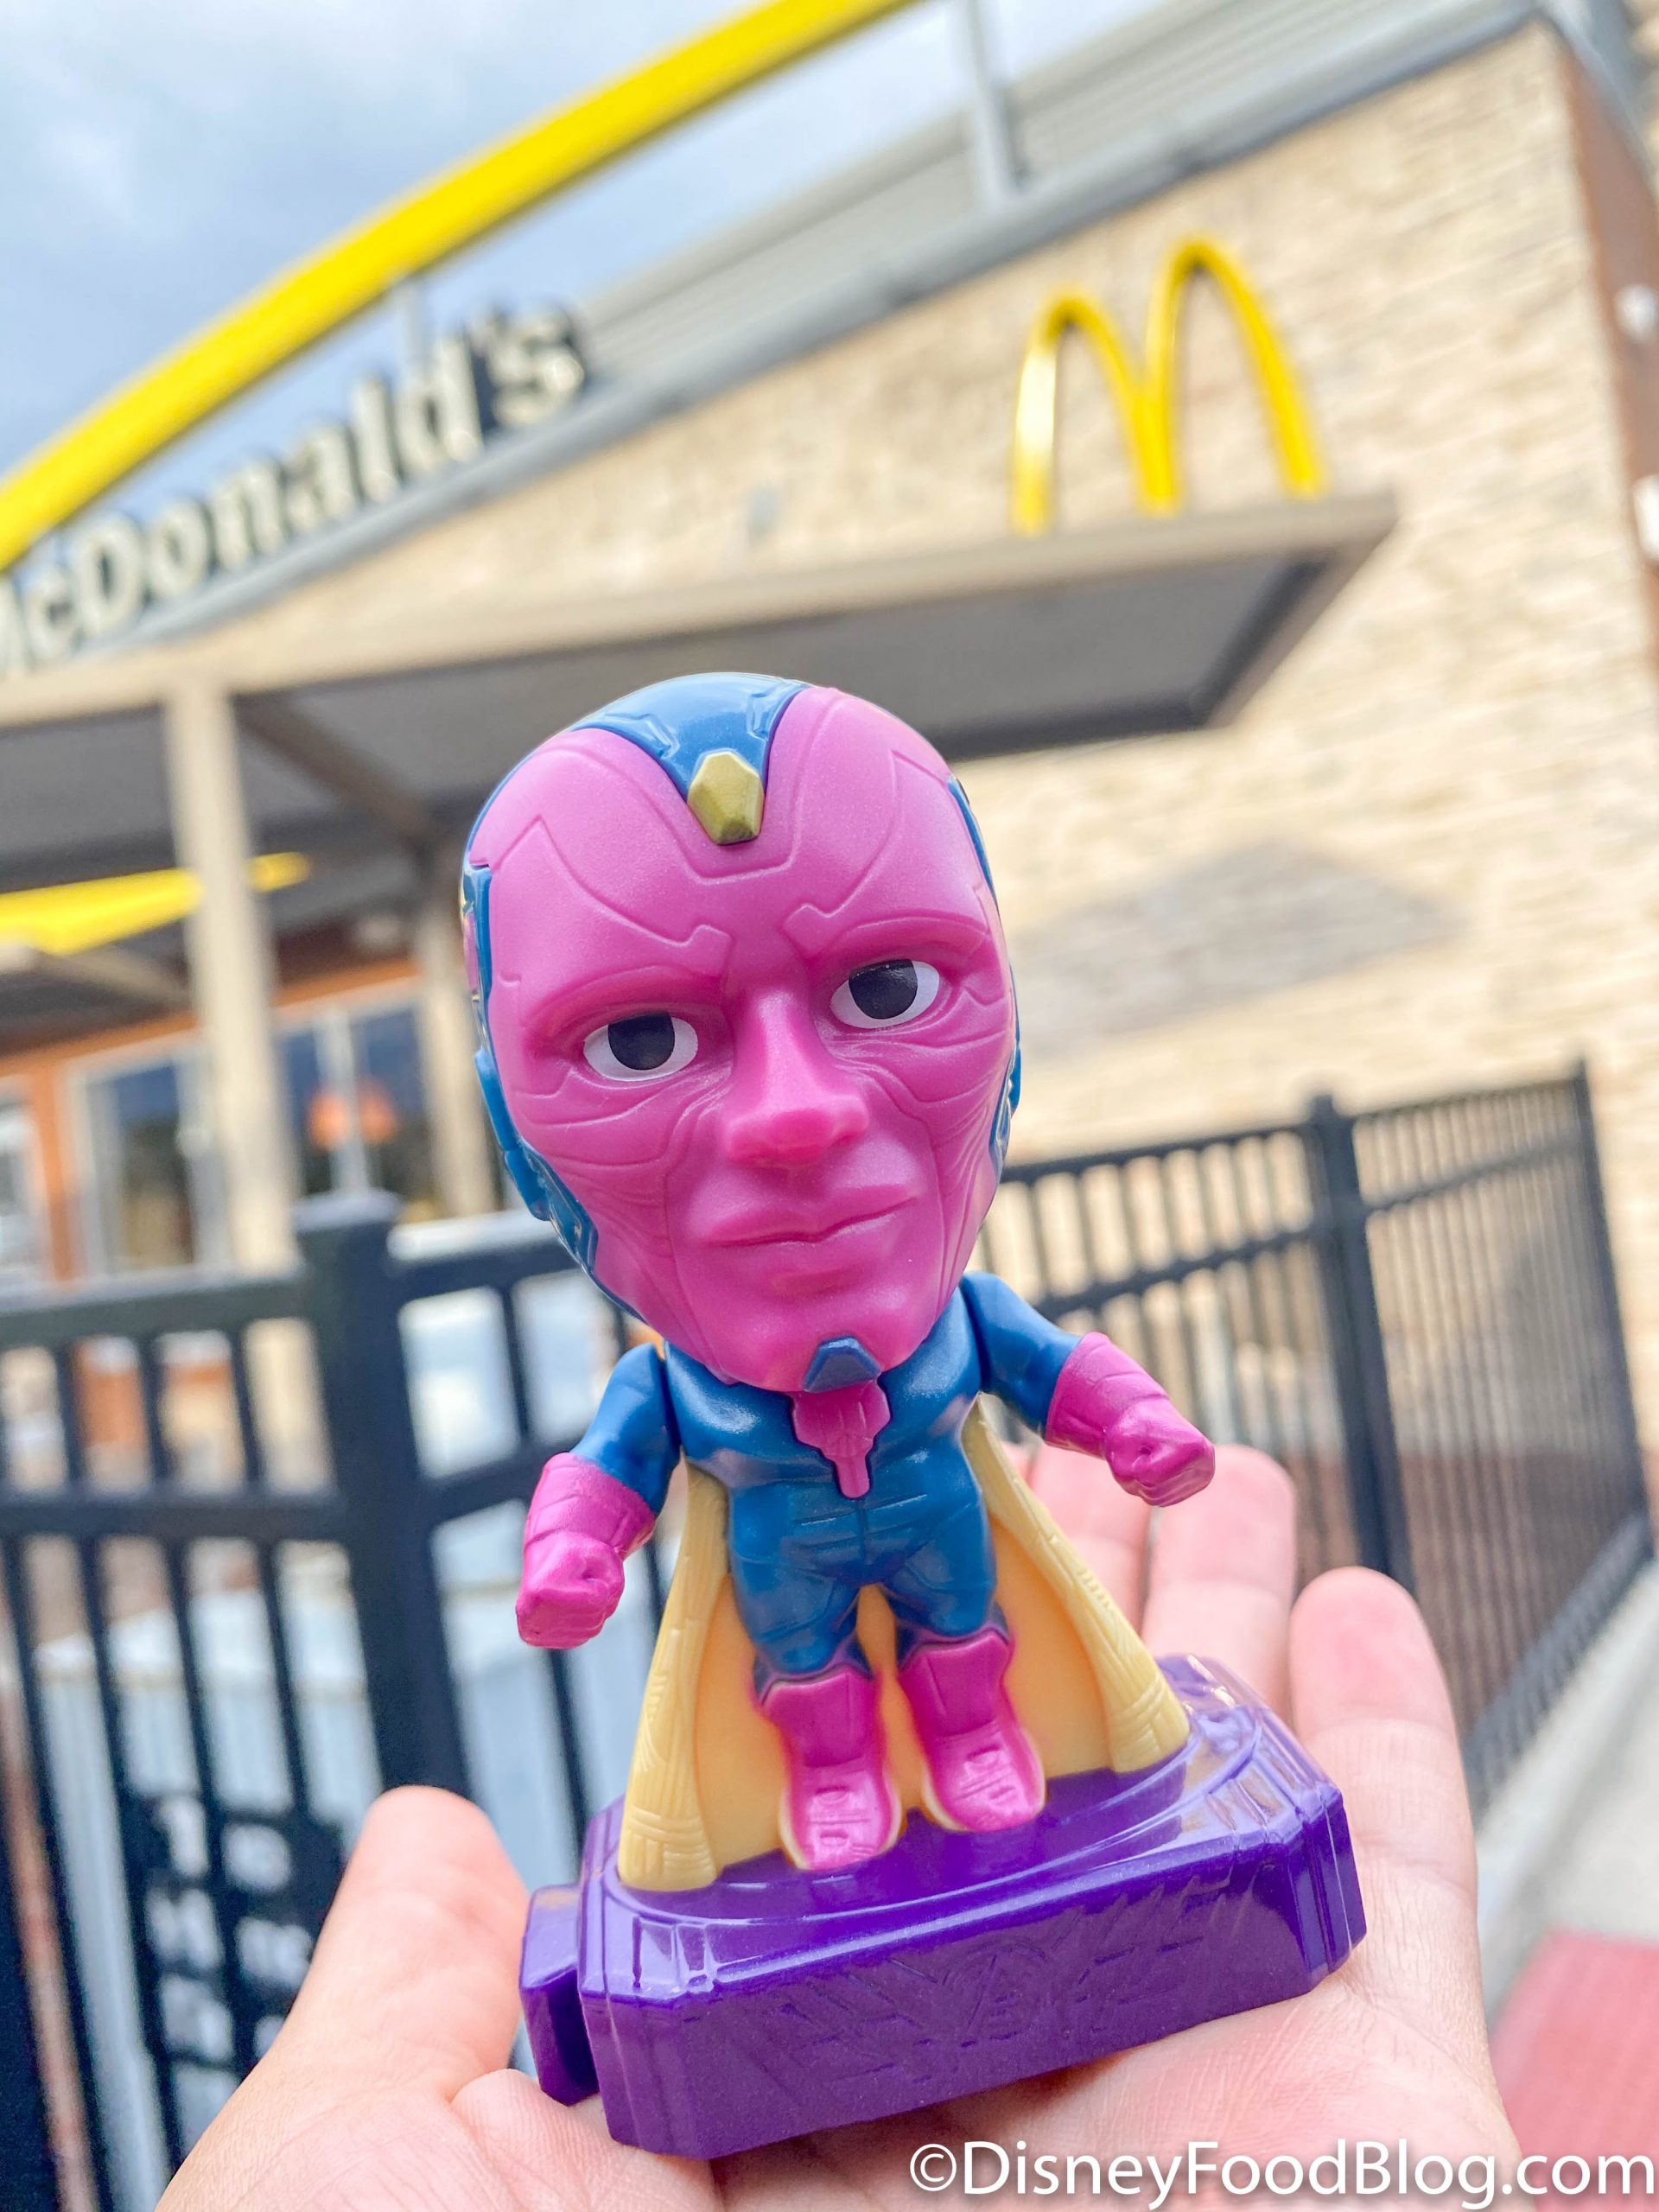 PICK YOUR FAVORITES! McDONALD'S 2020 MARVEL AVENGERS HEROES HAPPY MEAL TOYS 